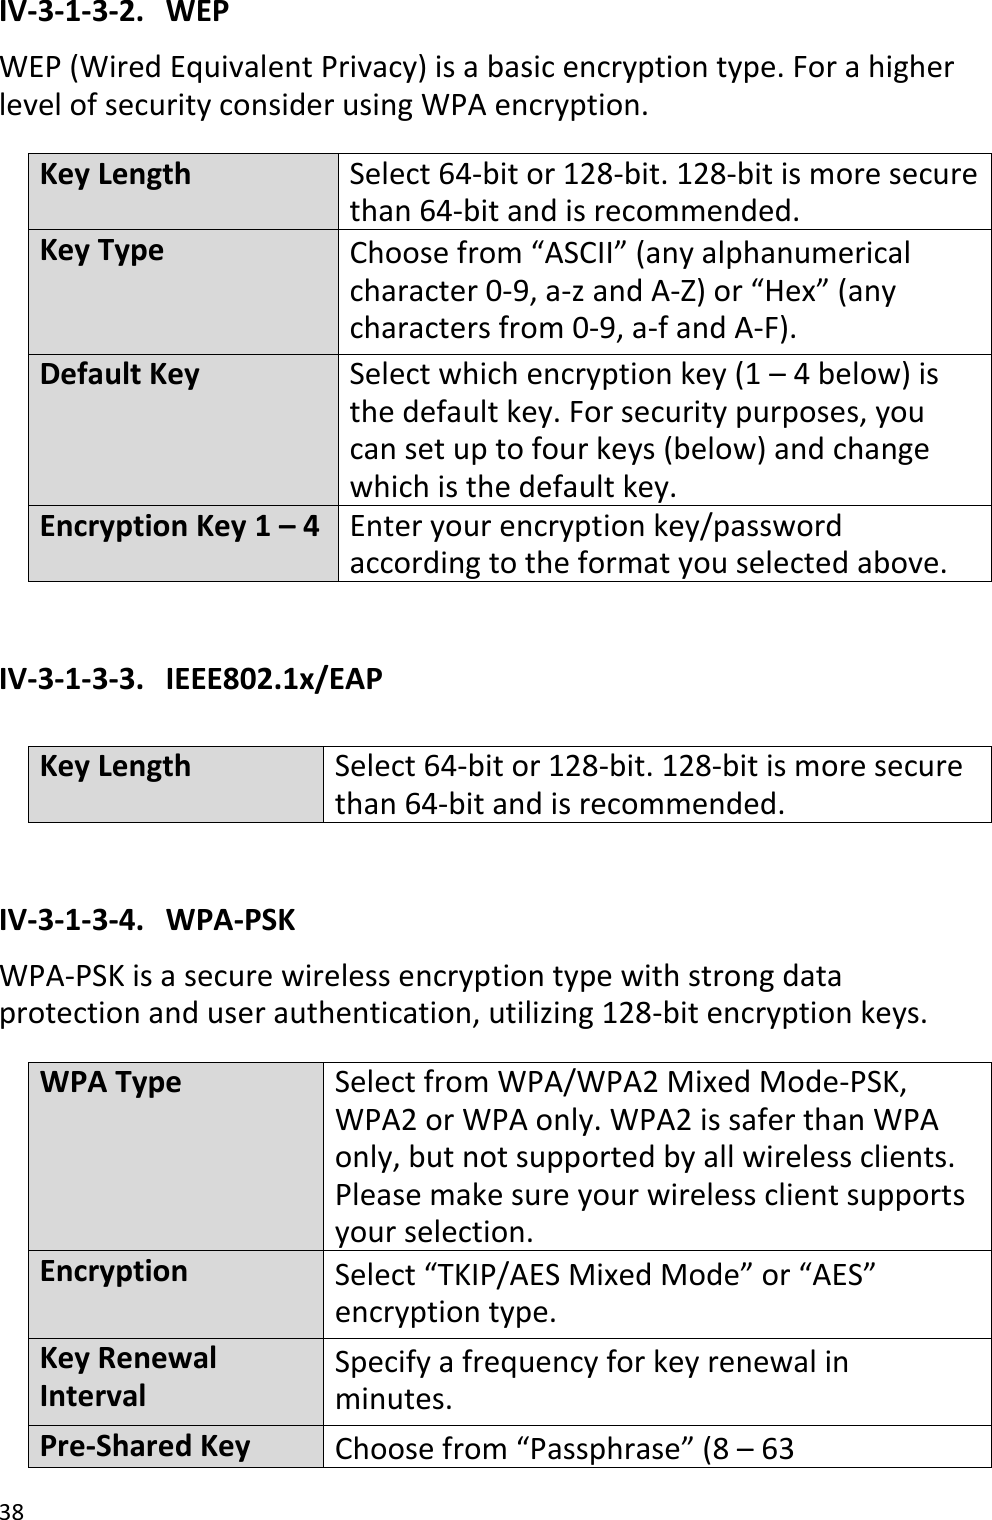 38  IV-3-1-3-2.   WEP WEP (Wired Equivalent Privacy) is a basic encryption type. For a higher level of security consider using WPA encryption.  Key Length Select 64-bit or 128-bit. 128-bit is more secure than 64-bit and is recommended. Key Type Choose from “ASCII” (any alphanumerical character 0-9, a-z and A-Z) or “Hex” (any characters from 0-9, a-f and A-F). Default Key Select which encryption key (1 – 4 below) is the default key. For security purposes, you can set up to four keys (below) and change which is the default key. Encryption Key 1 – 4 Enter your encryption key/password according to the format you selected above.  IV-3-1-3-3.   IEEE802.1x/EAP  Key Length Select 64-bit or 128-bit. 128-bit is more secure than 64-bit and is recommended.  IV-3-1-3-4.   WPA-PSK WPA-PSK is a secure wireless encryption type with strong data protection and user authentication, utilizing 128-bit encryption keys.  WPA Type Select from WPA/WPA2 Mixed Mode-PSK, WPA2 or WPA only. WPA2 is safer than WPA only, but not supported by all wireless clients. Please make sure your wireless client supports your selection. Encryption Select “TKIP/AES Mixed Mode” or “AES” encryption type. Key Renewal Interval Specify a frequency for key renewal in minutes. Pre-Shared Key Choose from “Passphrase” (8 – 63 